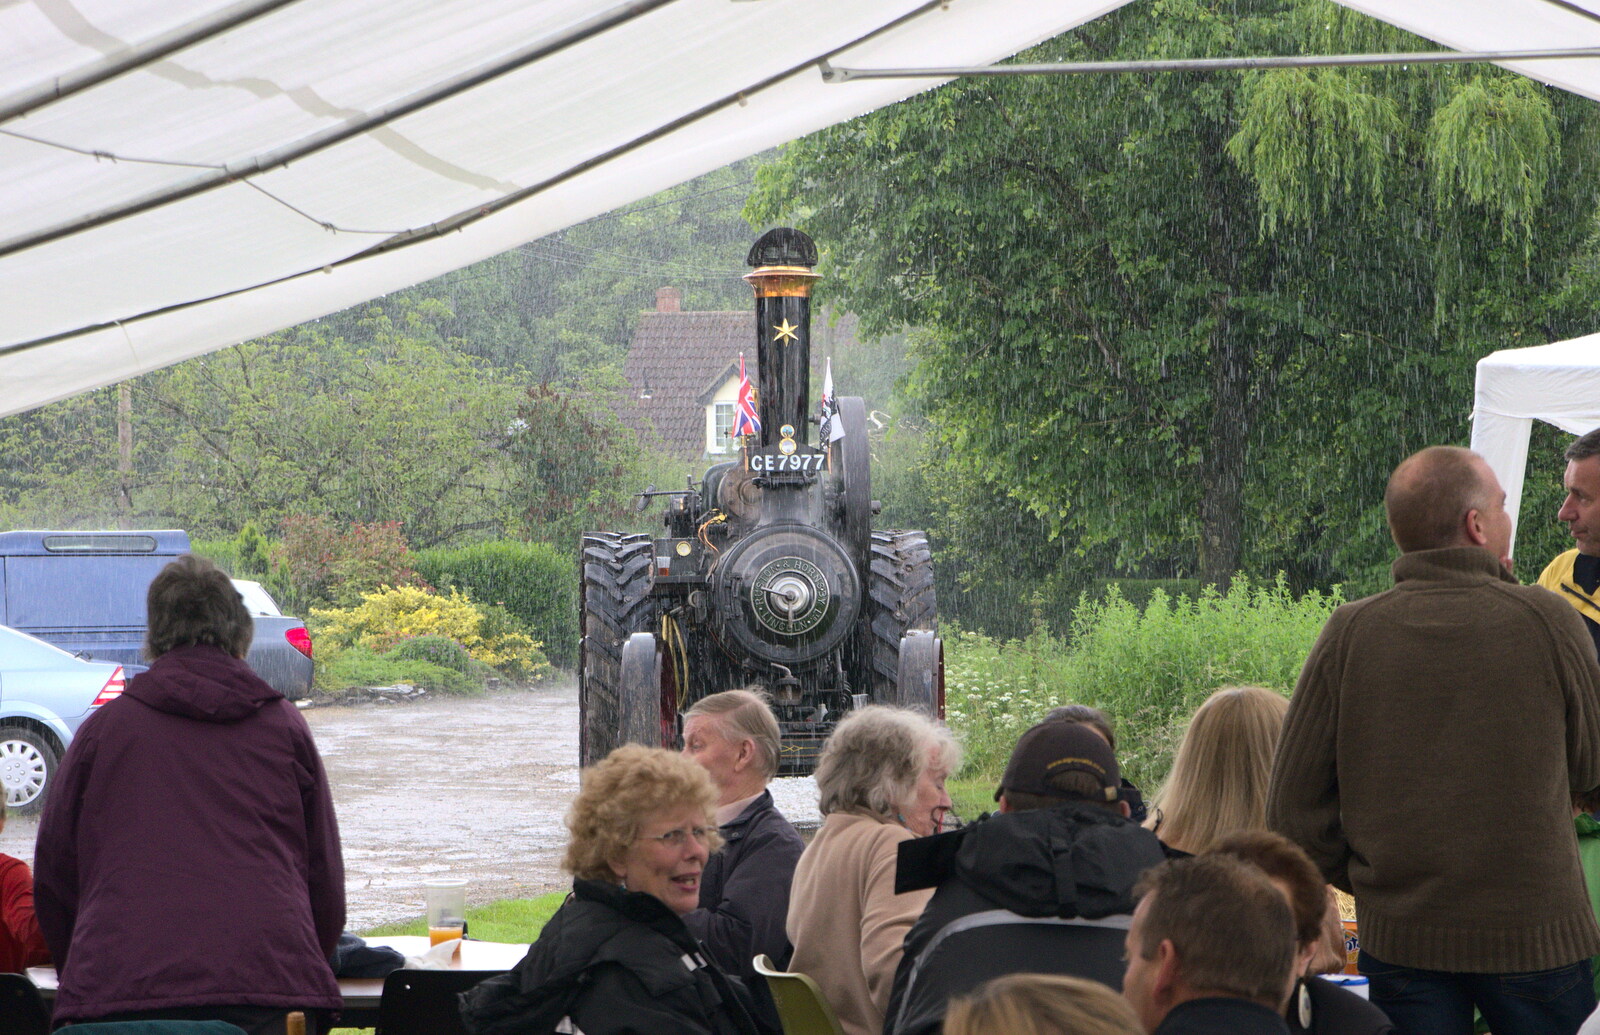 Olive the engine in the rain from Thrandeston Pig, Little Green, Thrandeston, Suffolk - 26th June 2016